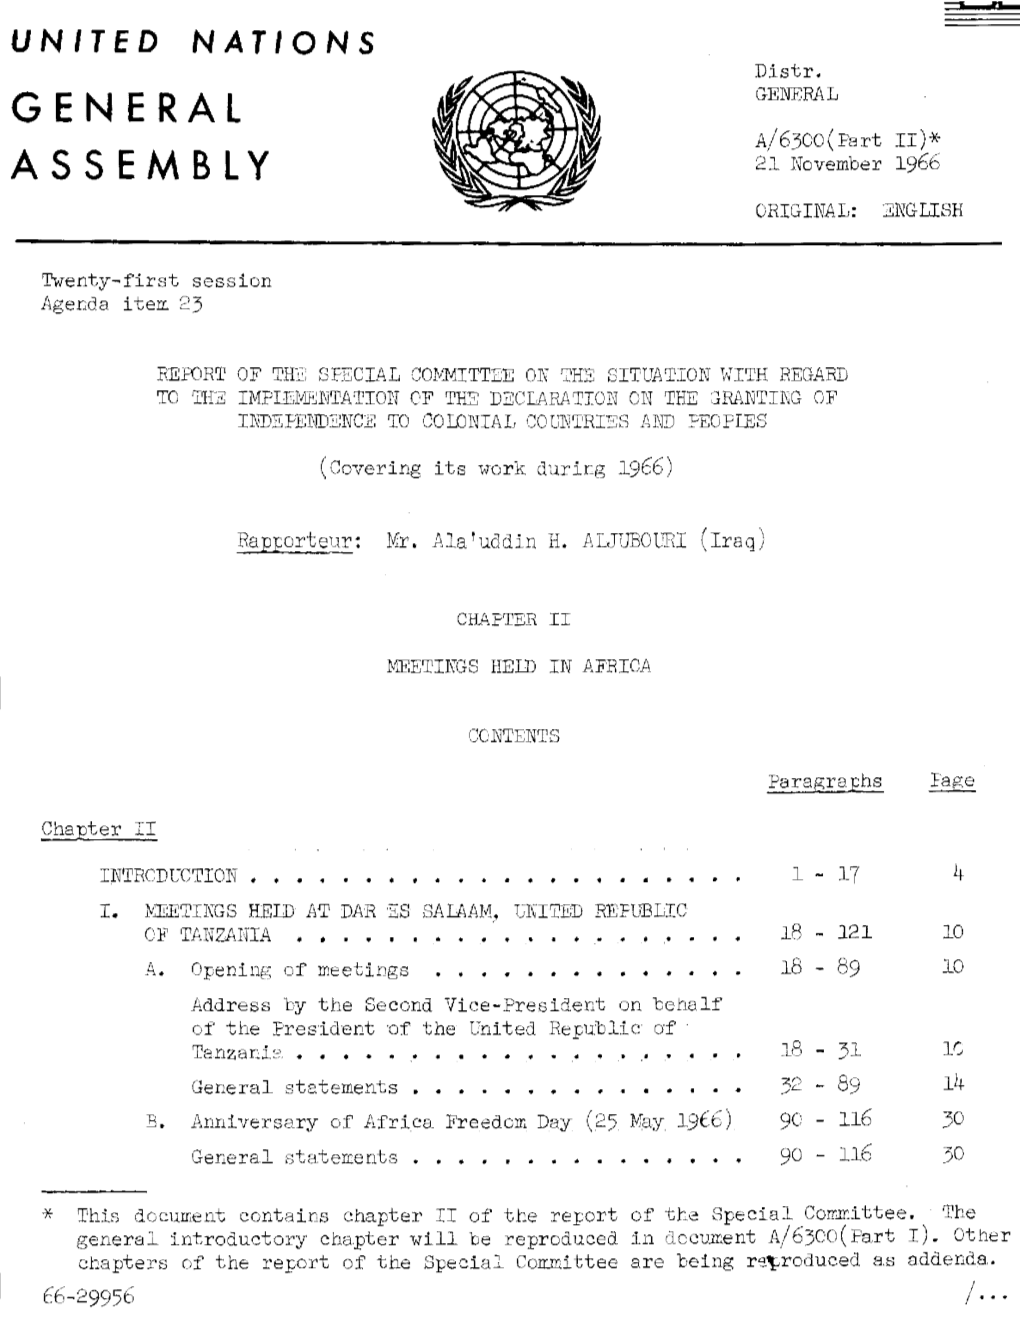 General Assembly Resolution 1514 (XV) with Regard to Colonial Territories Considered by the Special Committee During Its Meetings in Africa (1966)